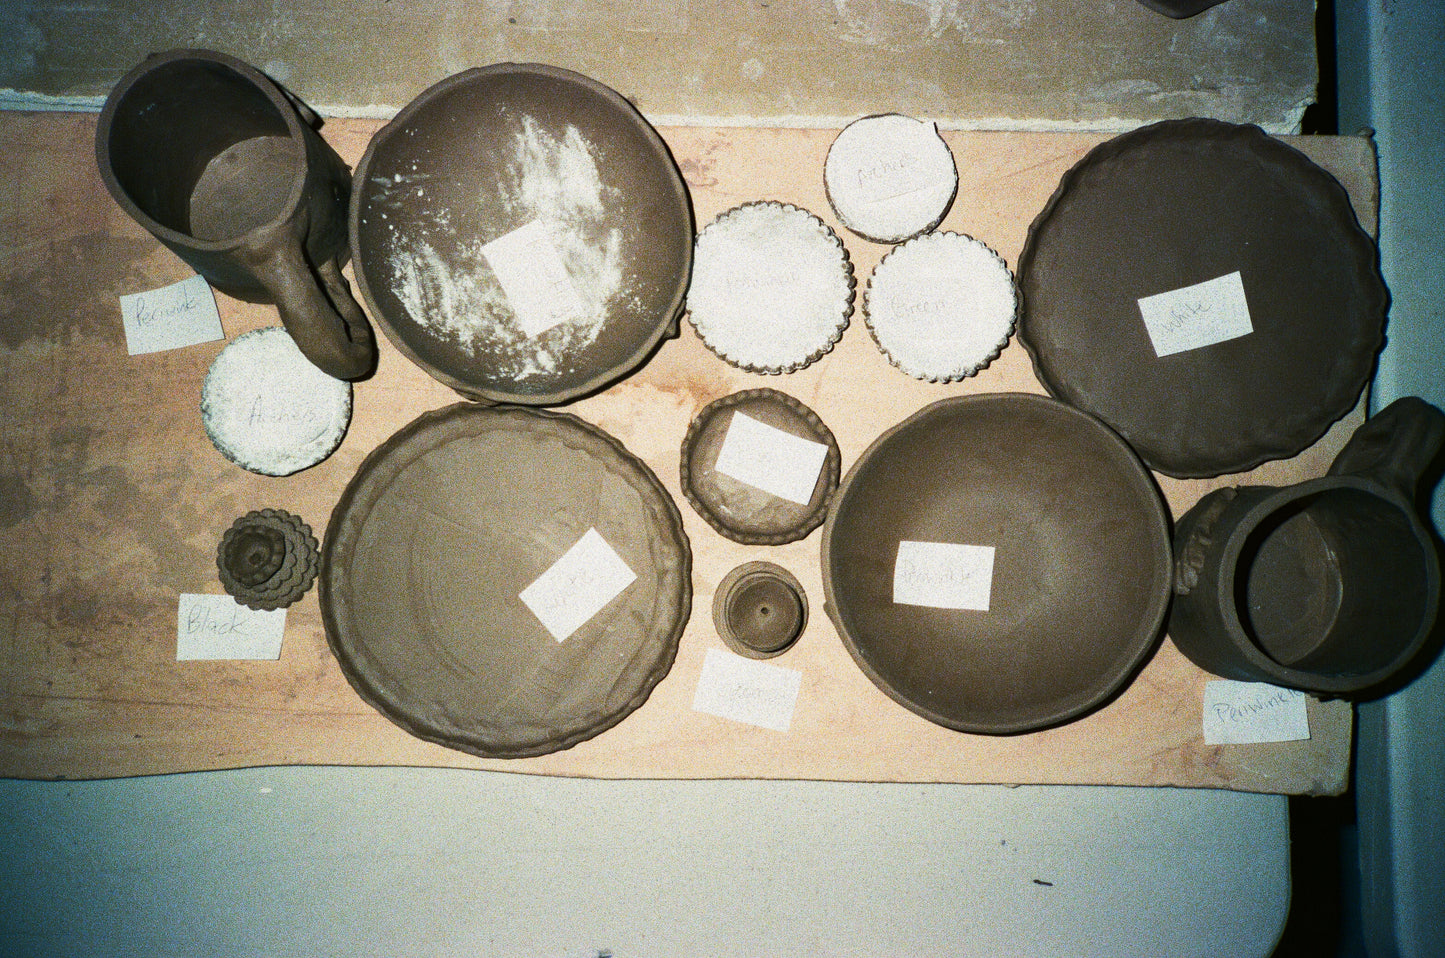 Grainy film image of various clay plates, mugs, and incense burners made out of dark and light clay.